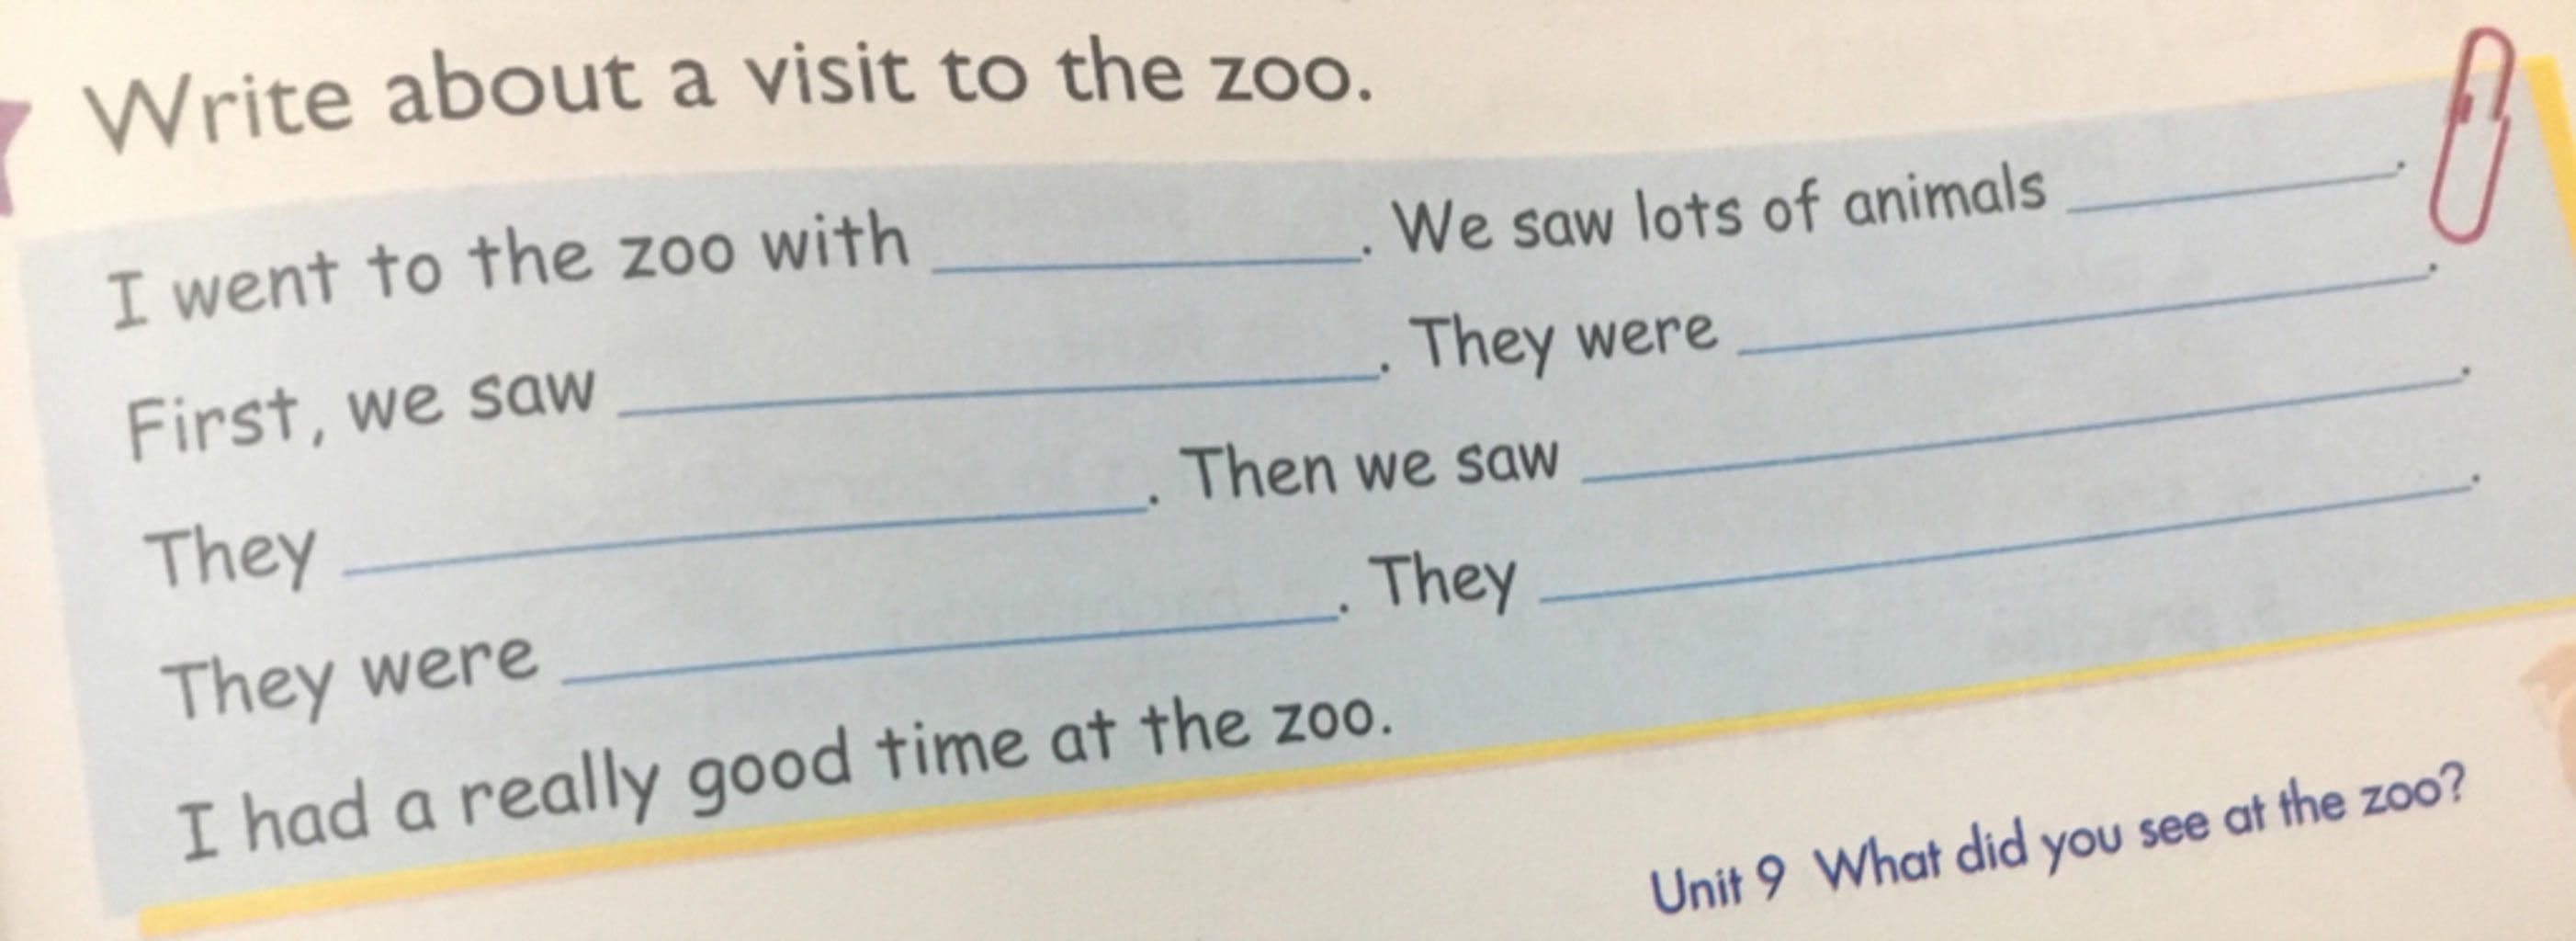 Write about a visit to the zoo. I went to the zoo with We saw lots of  animals First, we saw They were They Then we saW They were They I had